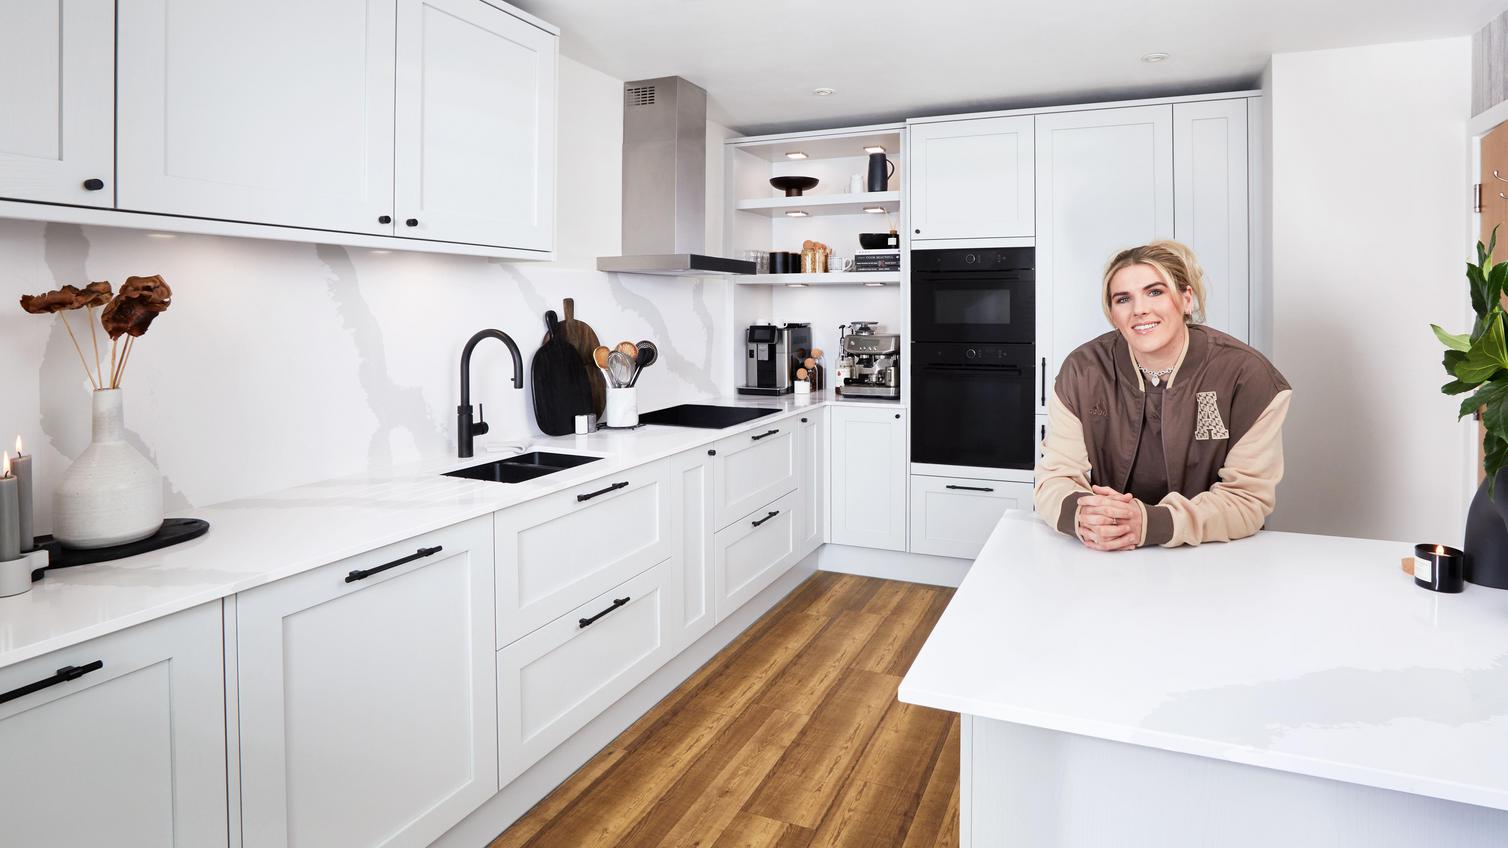 Millie Bright leaning on the breakfast bar in her new shaker kitchen, which has white worktops, black handles, and a black tap.